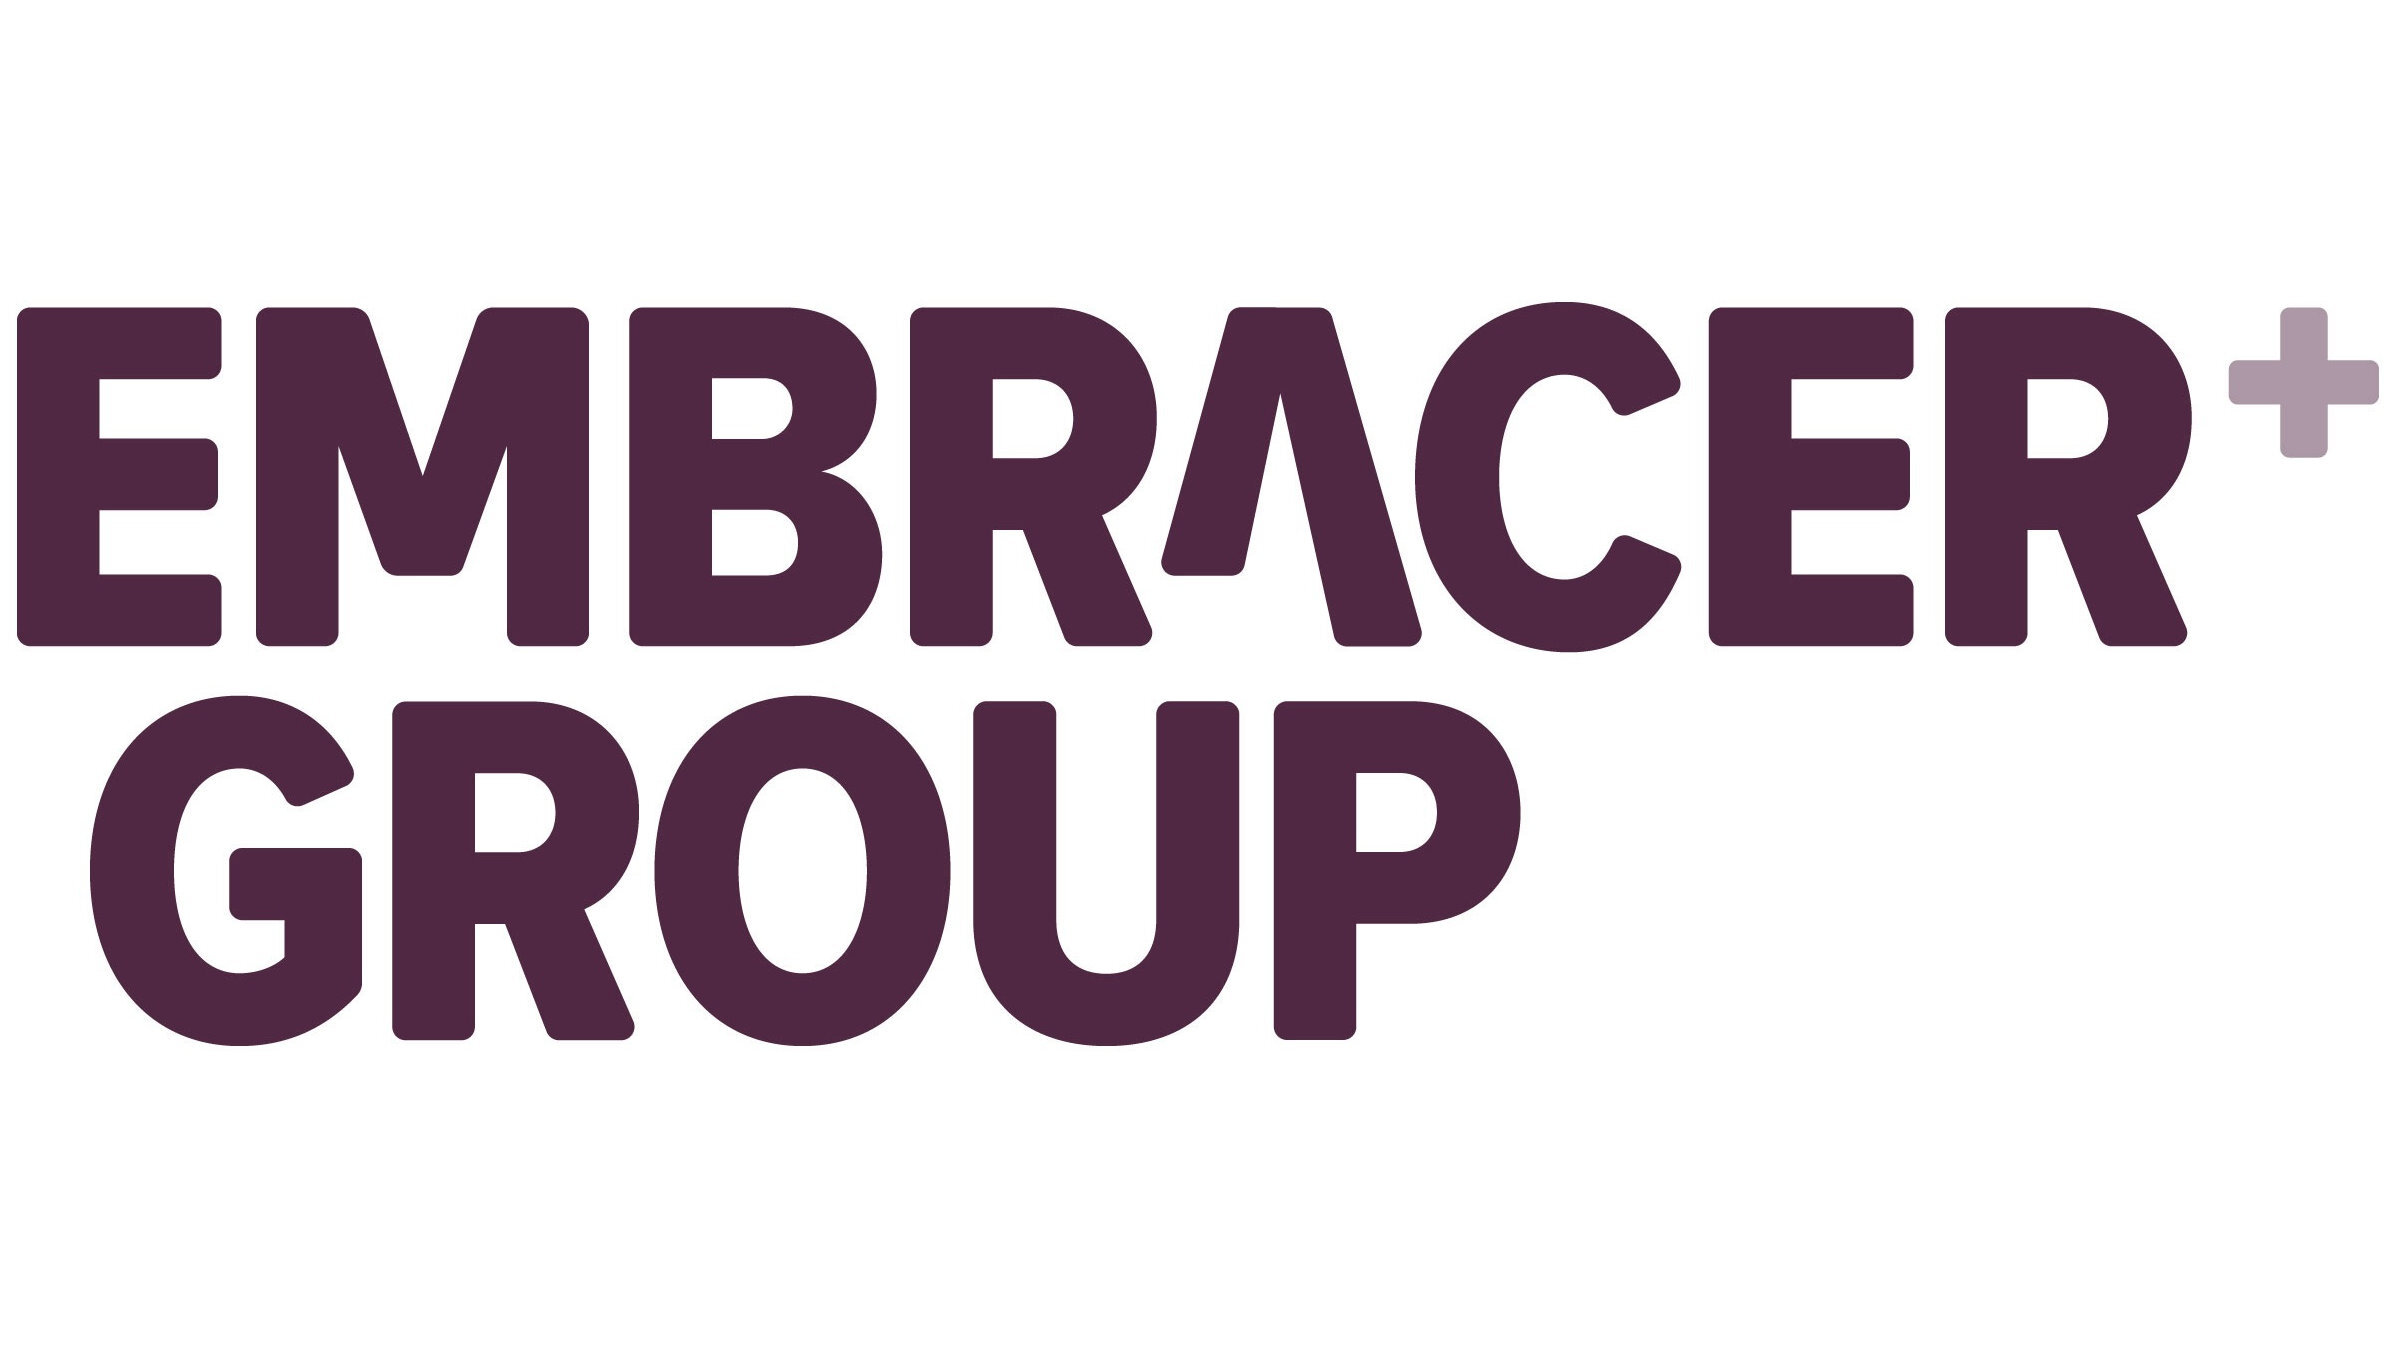 The Embracer Group logo: the words "Embracer Group" in purple